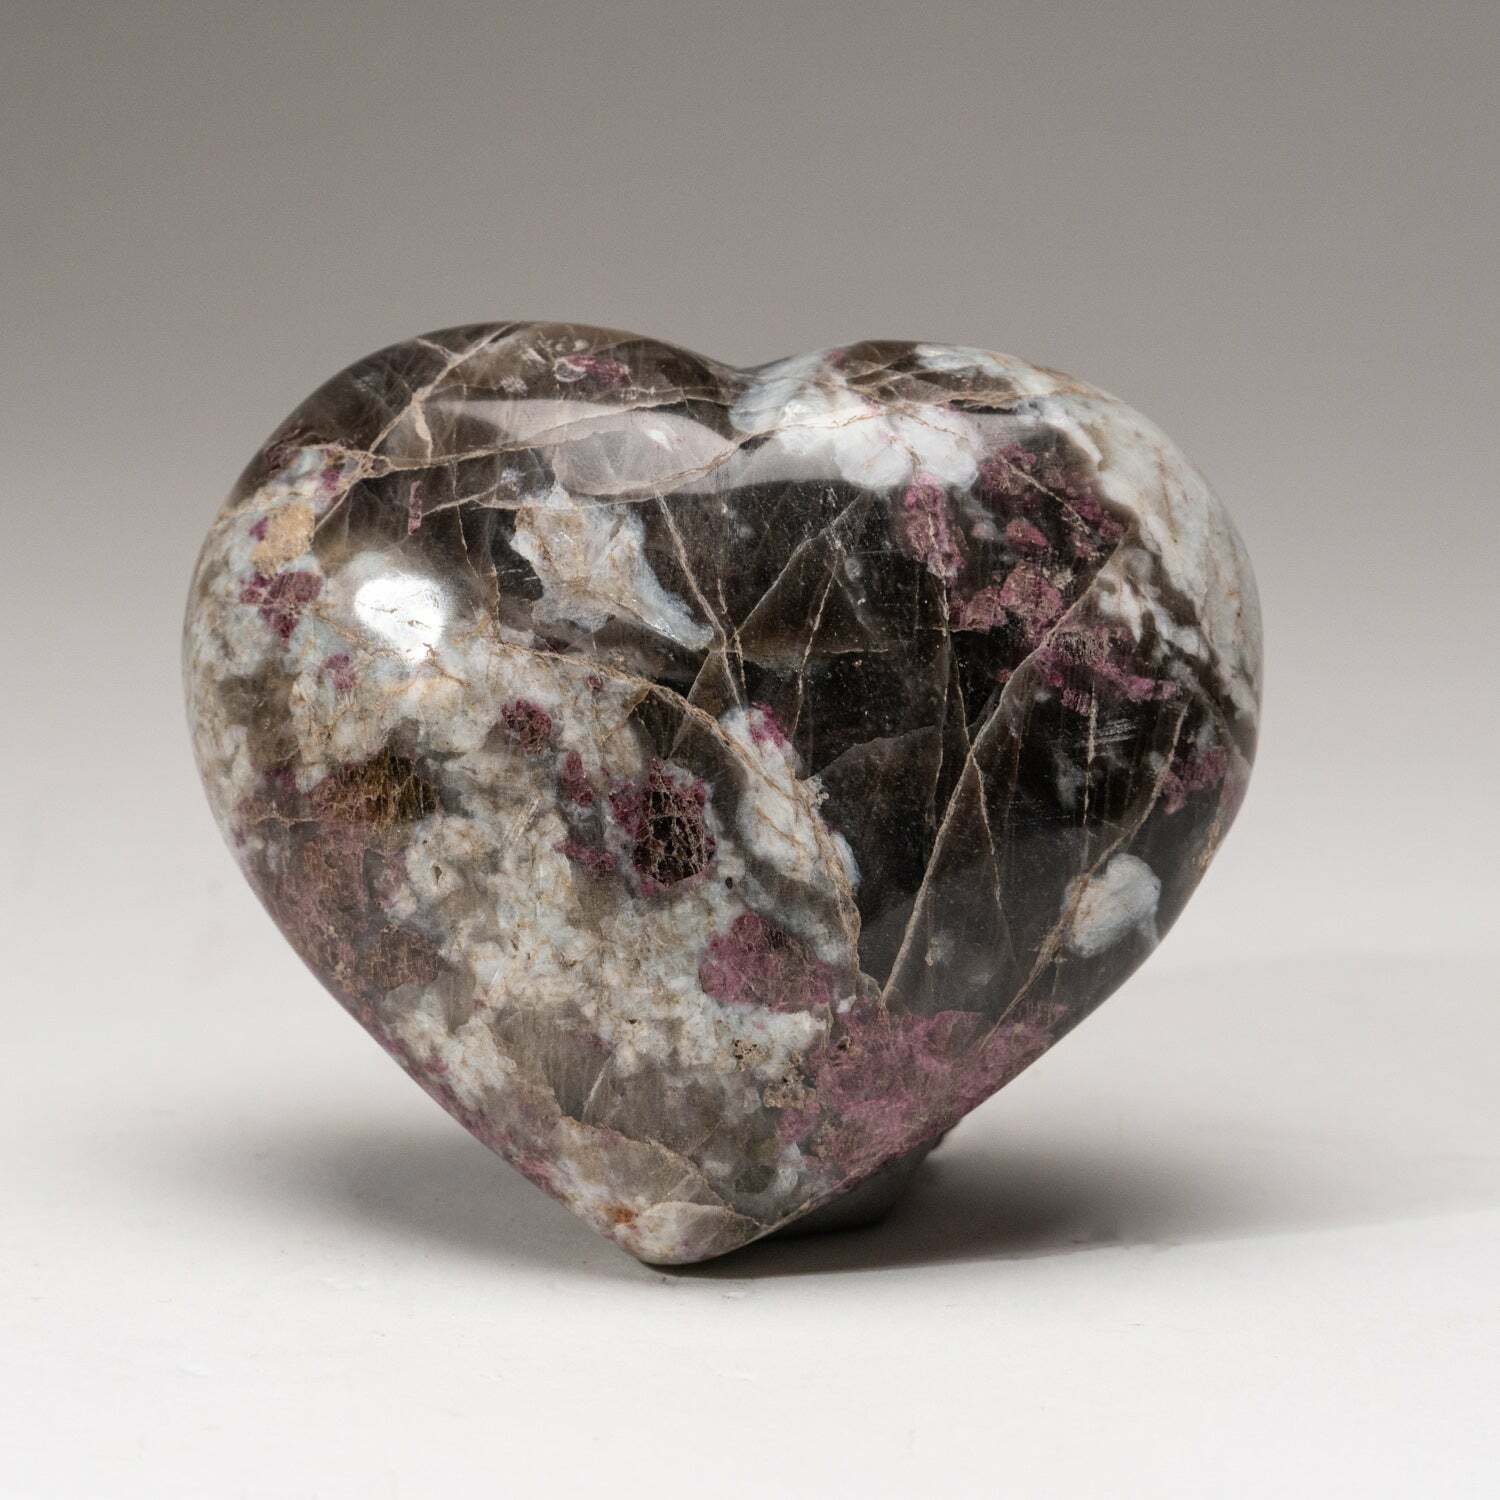 Genuine Polished Ruby in Quartz Heart from India (430 grams)